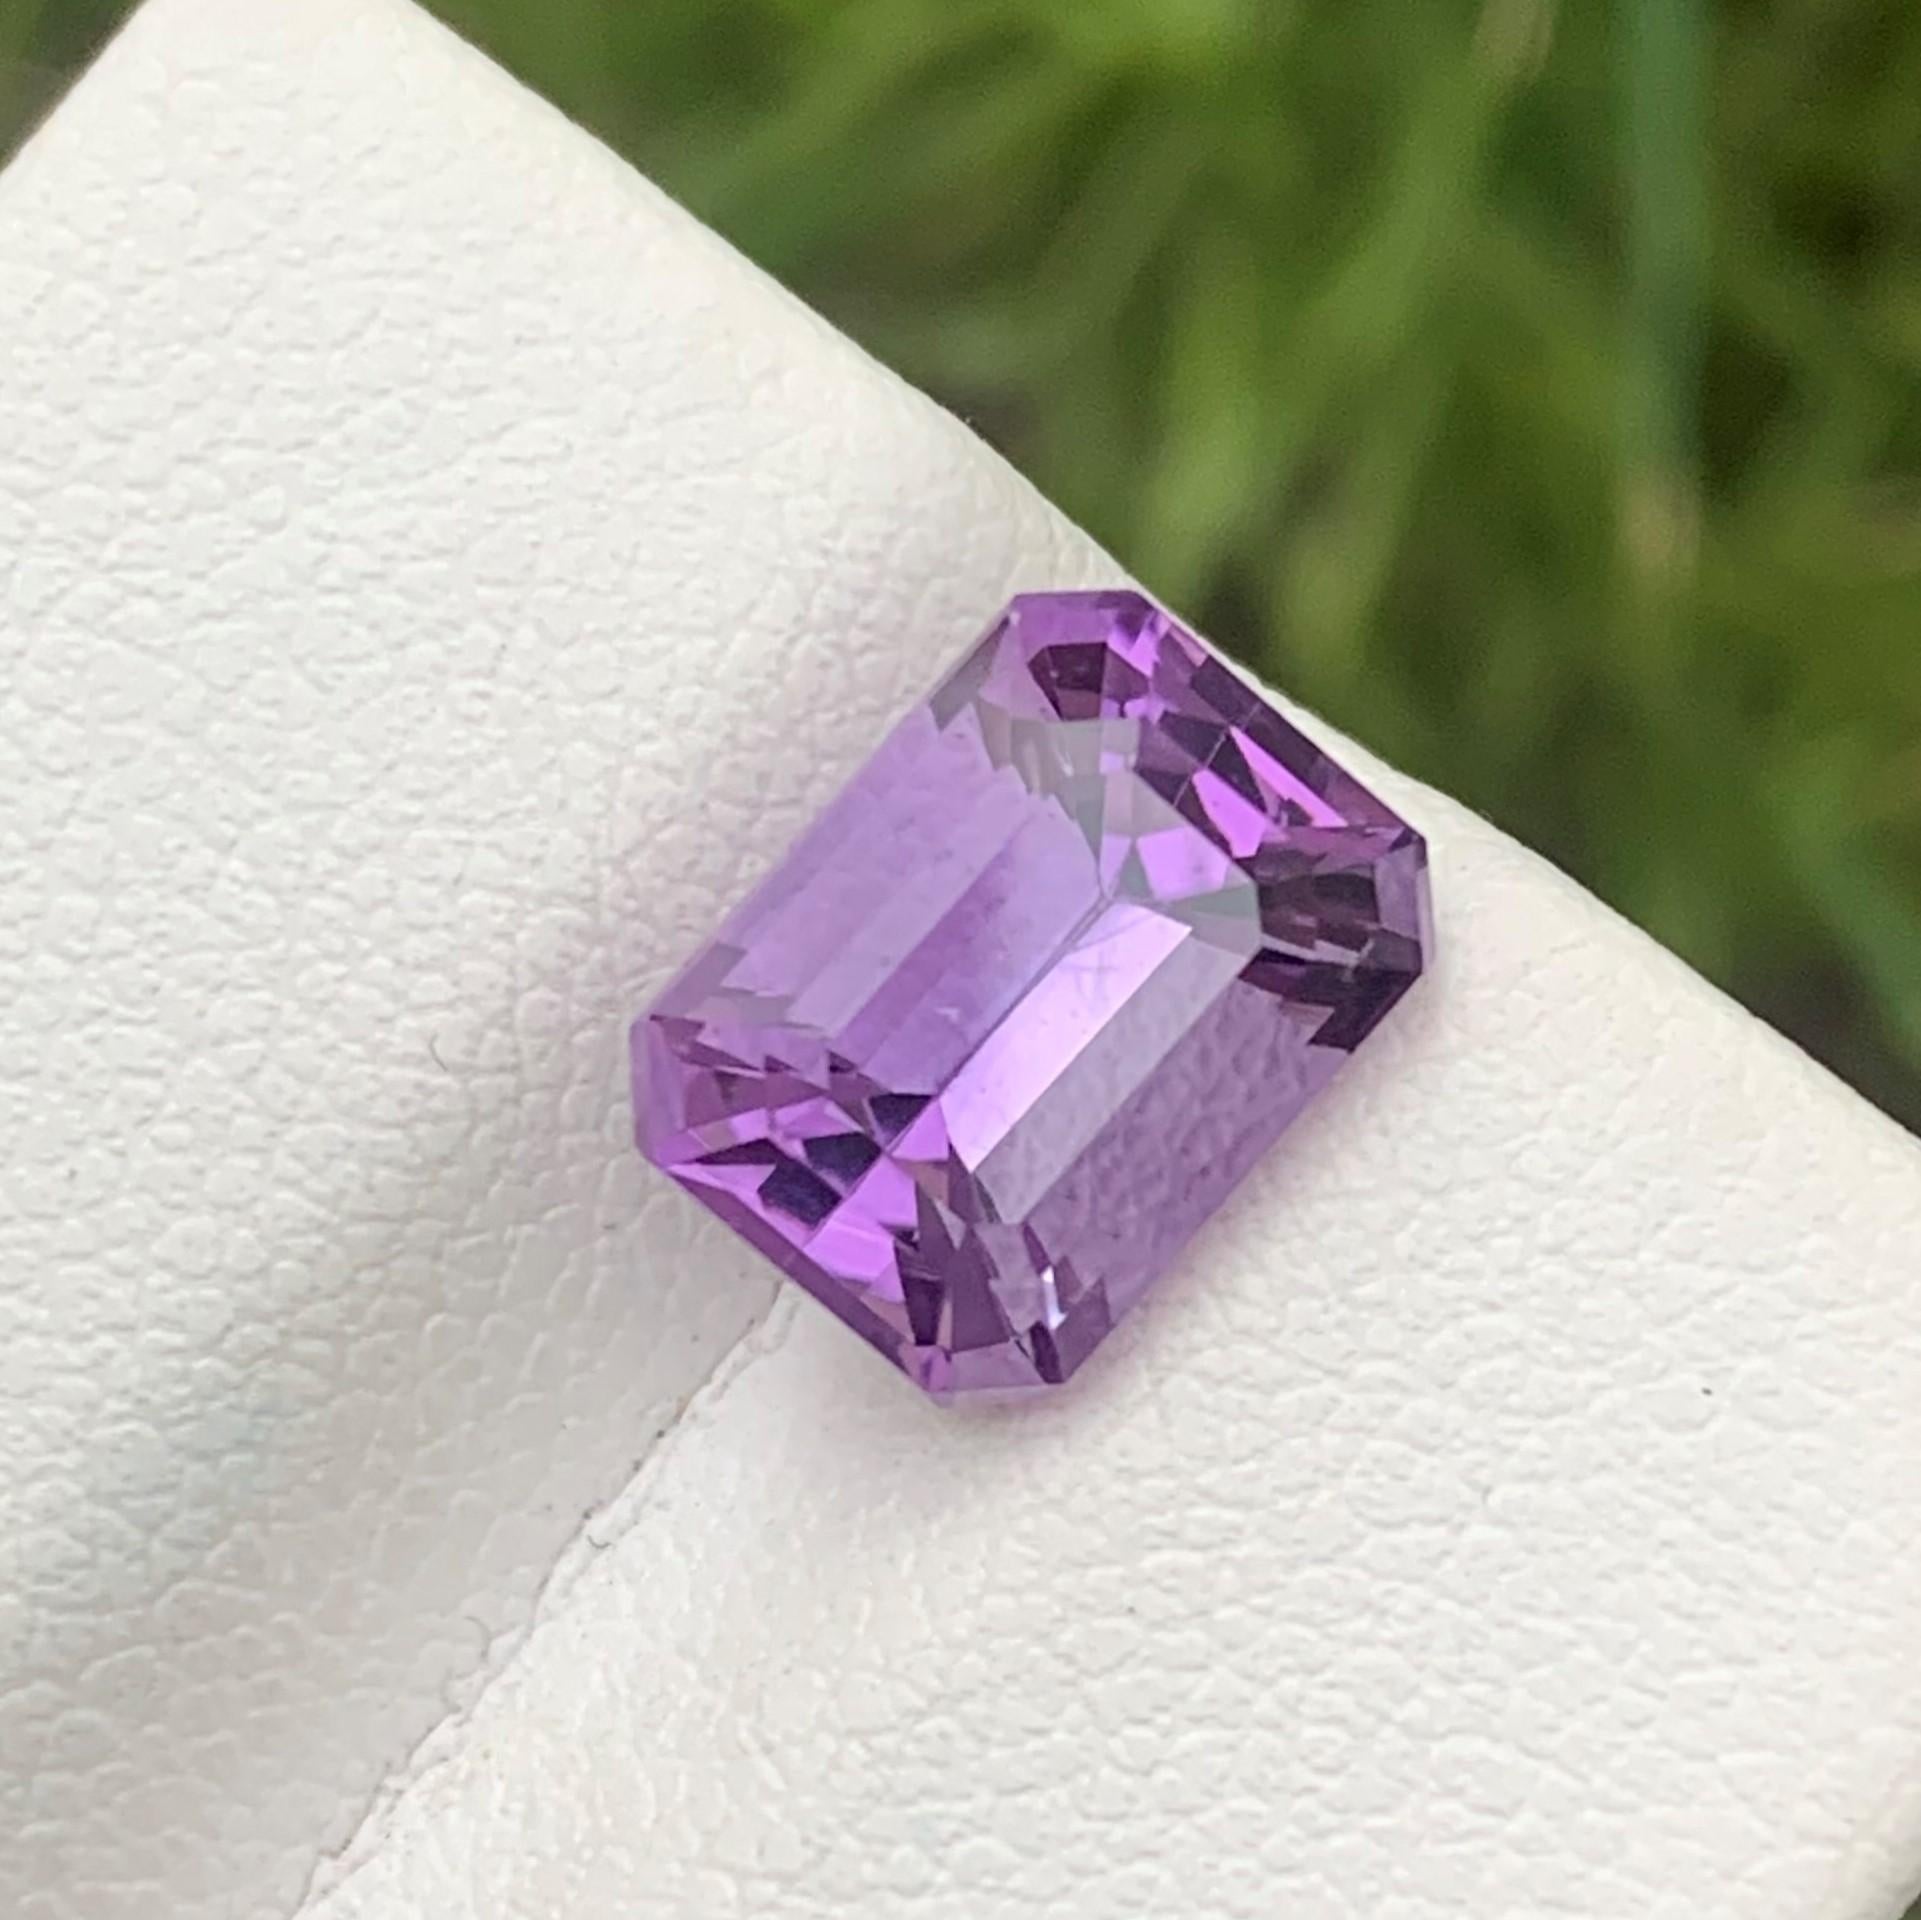 Gemstone Type : Amethyst
Weight : 3.0 Carats
Dimensions : 9.6x7.2x6.6 mm
Clarity : Clean
Origin : Brazil
Color: Purple
Shape: Emerald
Facet: Emerald Cut
Certificate: On Demand
Month: February
Purported amethyst powers for healing
enhancing the